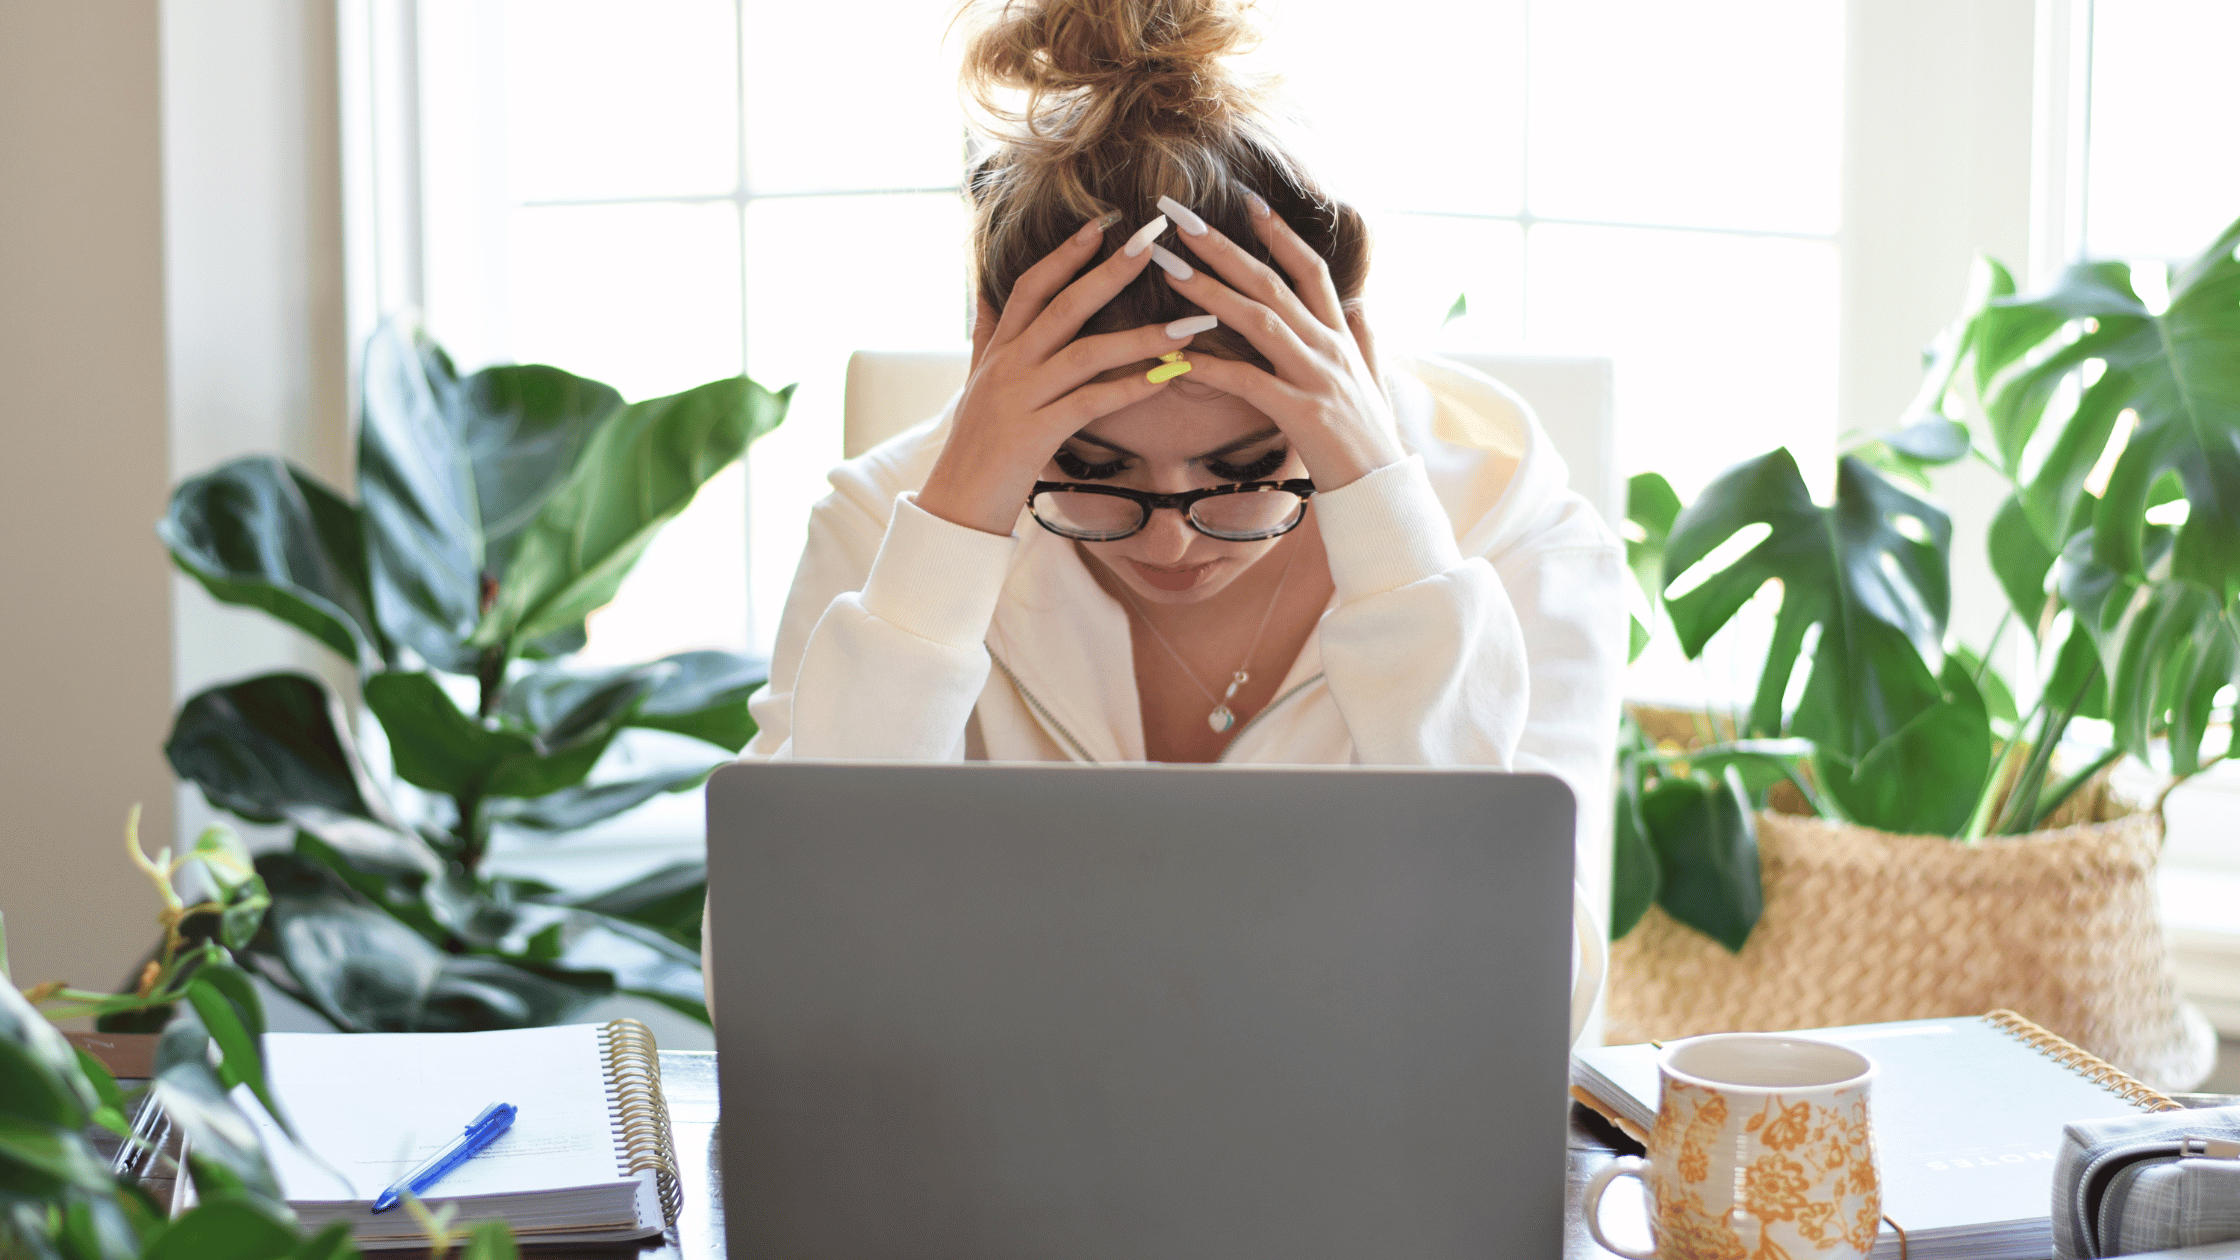 A woman, overwhelmed by her inner critic dialogue, holds her head in her hands while sitting at her work desk, a worried expression on her face and a laptop open in front of her.